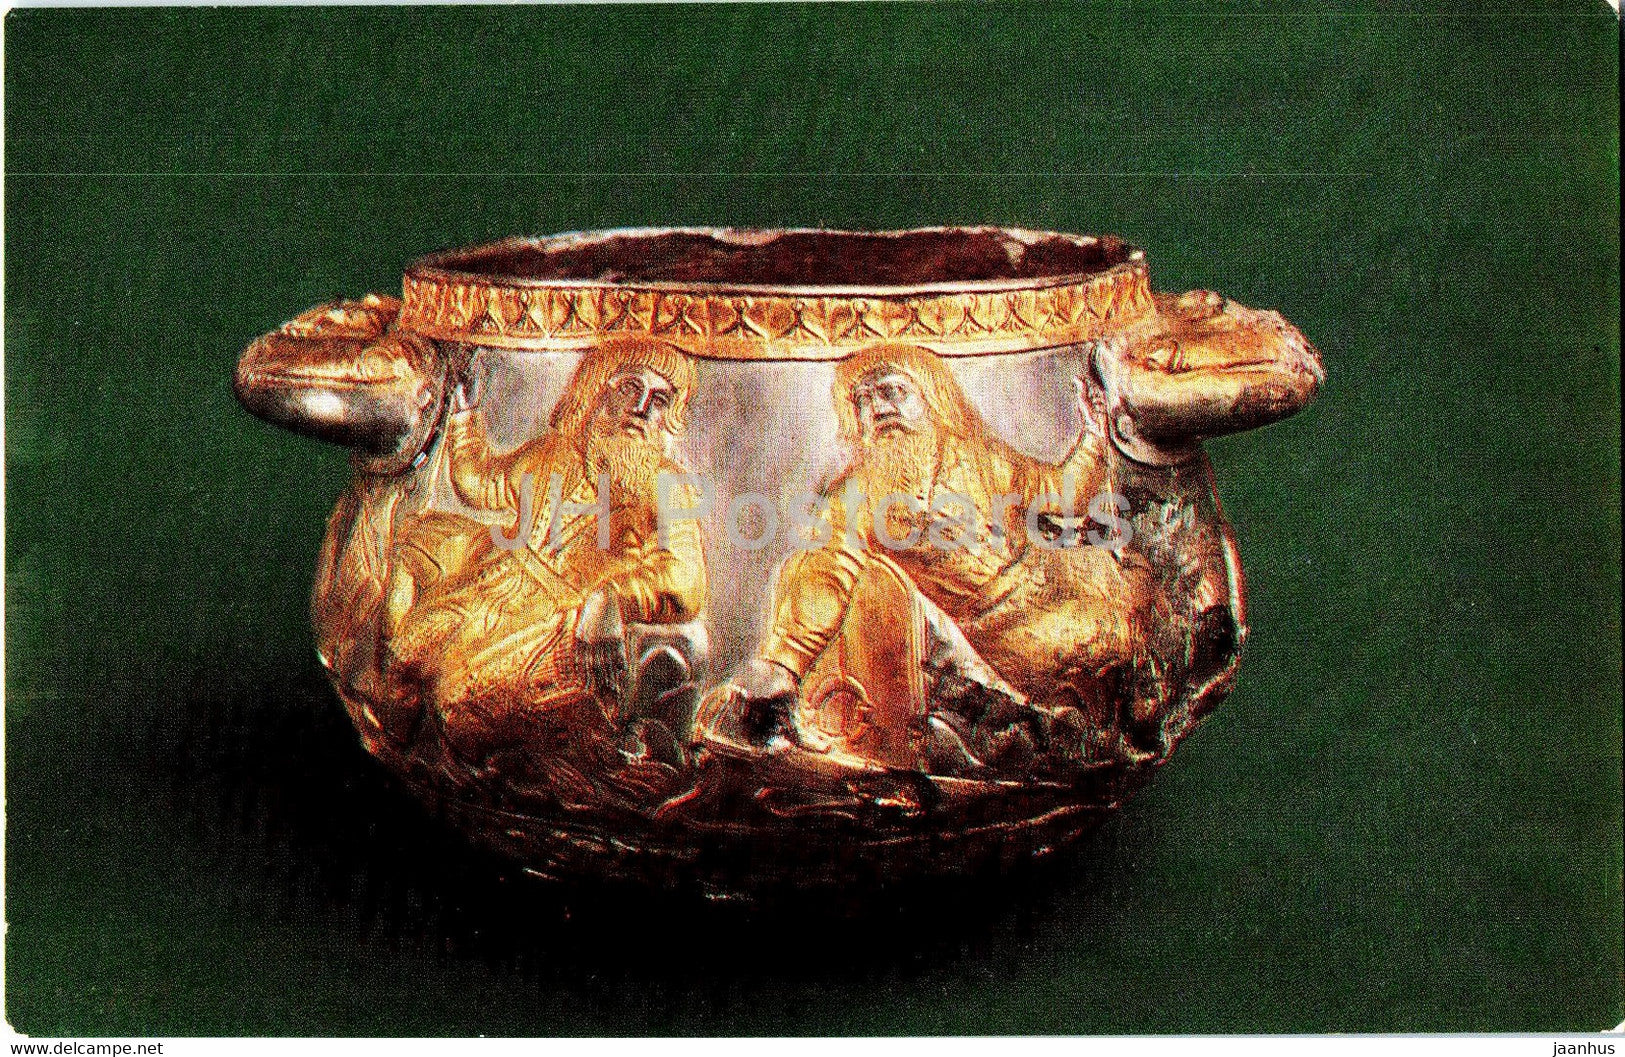 Cup with a frieze - Scythian warriors - Goldwork of 6th-2nd centuries BC - Ancient Art - 1979 - Russia USSR - unused - JH Postcards